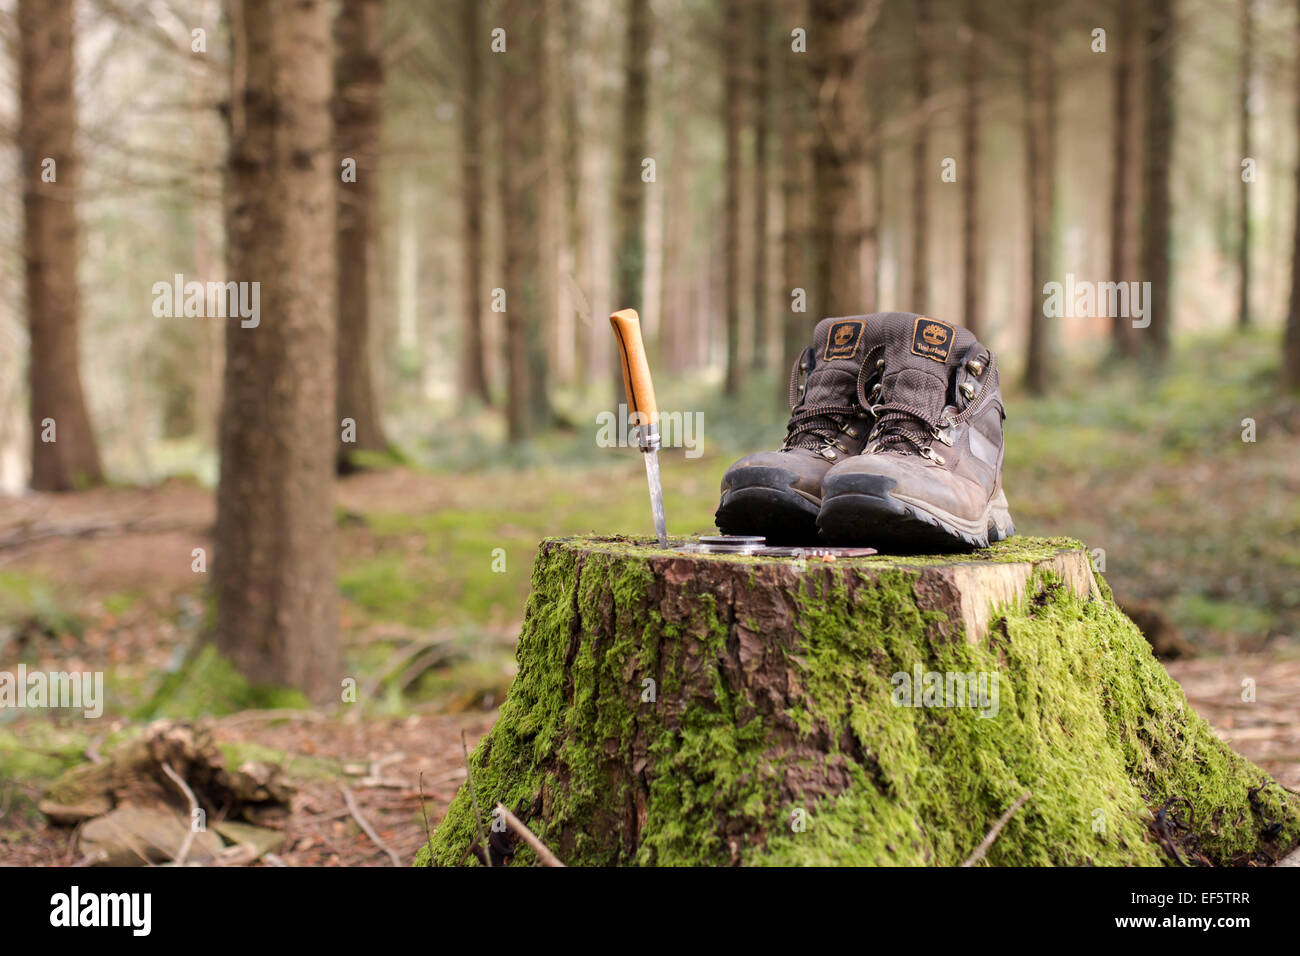 Walking boots knife and compass in woodland to convey outdoor adventure Stock Photo